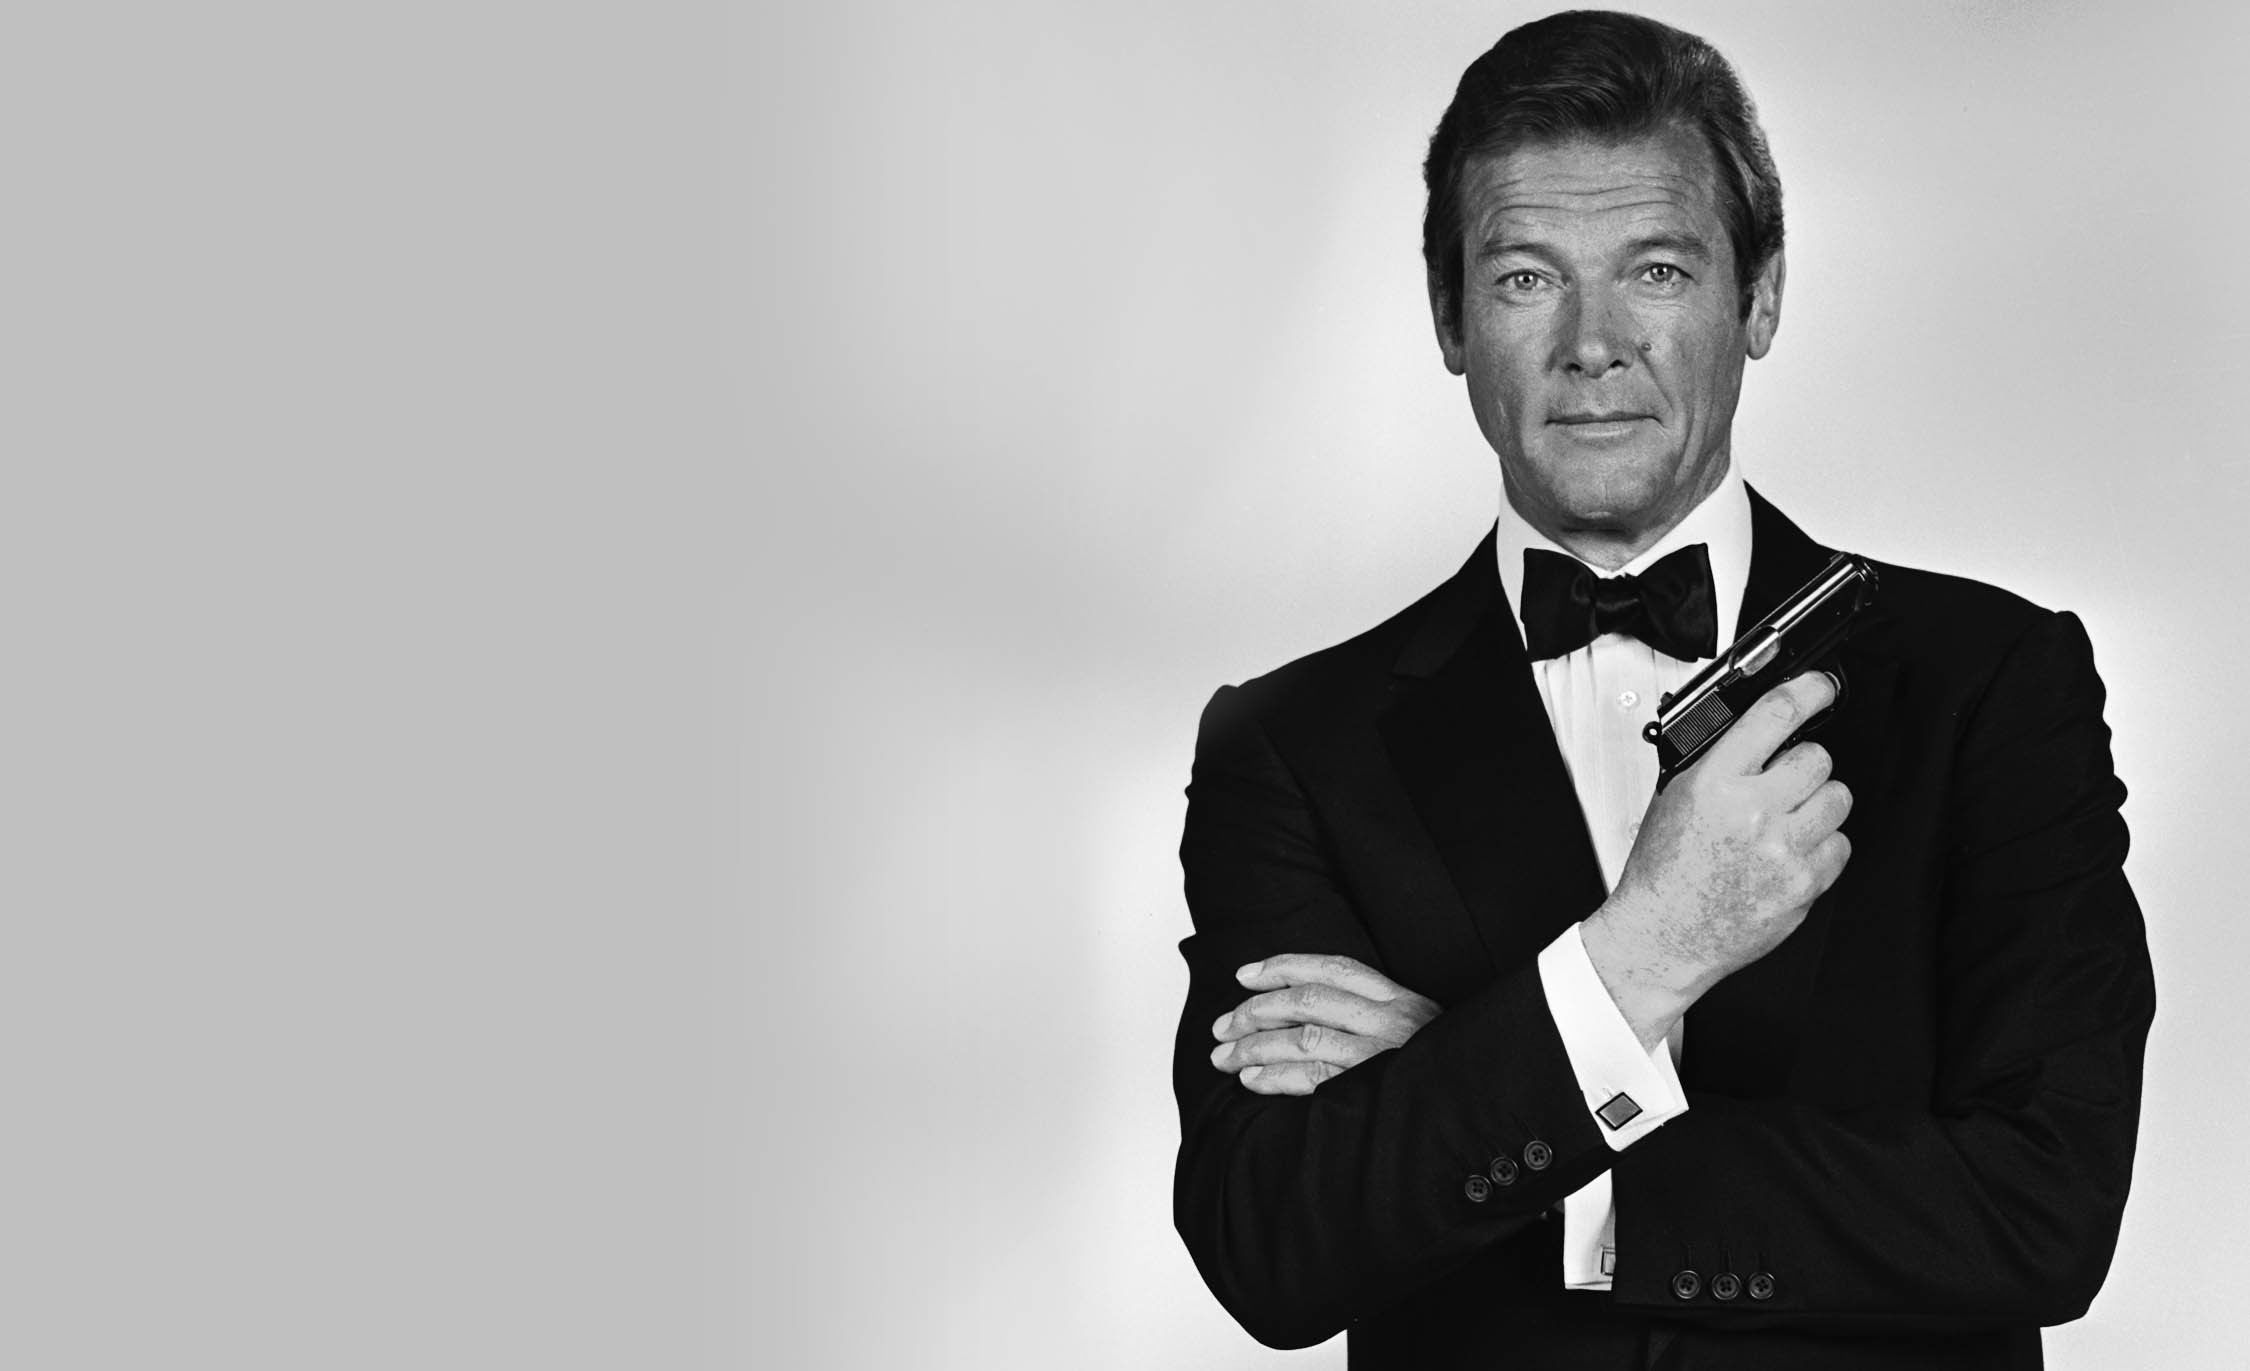 RIP: Iconic James Bond Roger Moore dies at 89 after battle with cancer